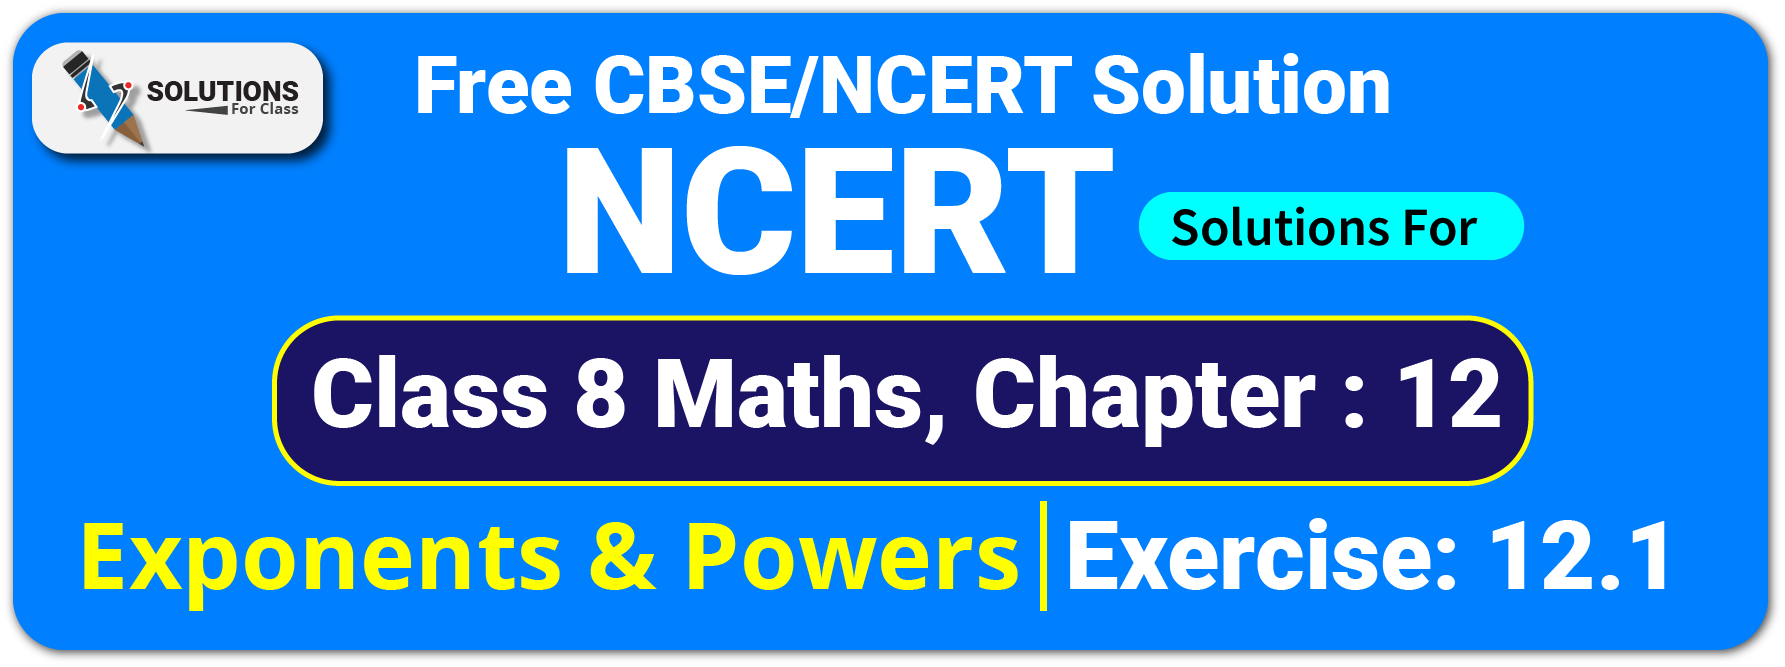 NCERT Solutions For Class 8 Chapter 12, Exponents and Powers, Exercise12.1